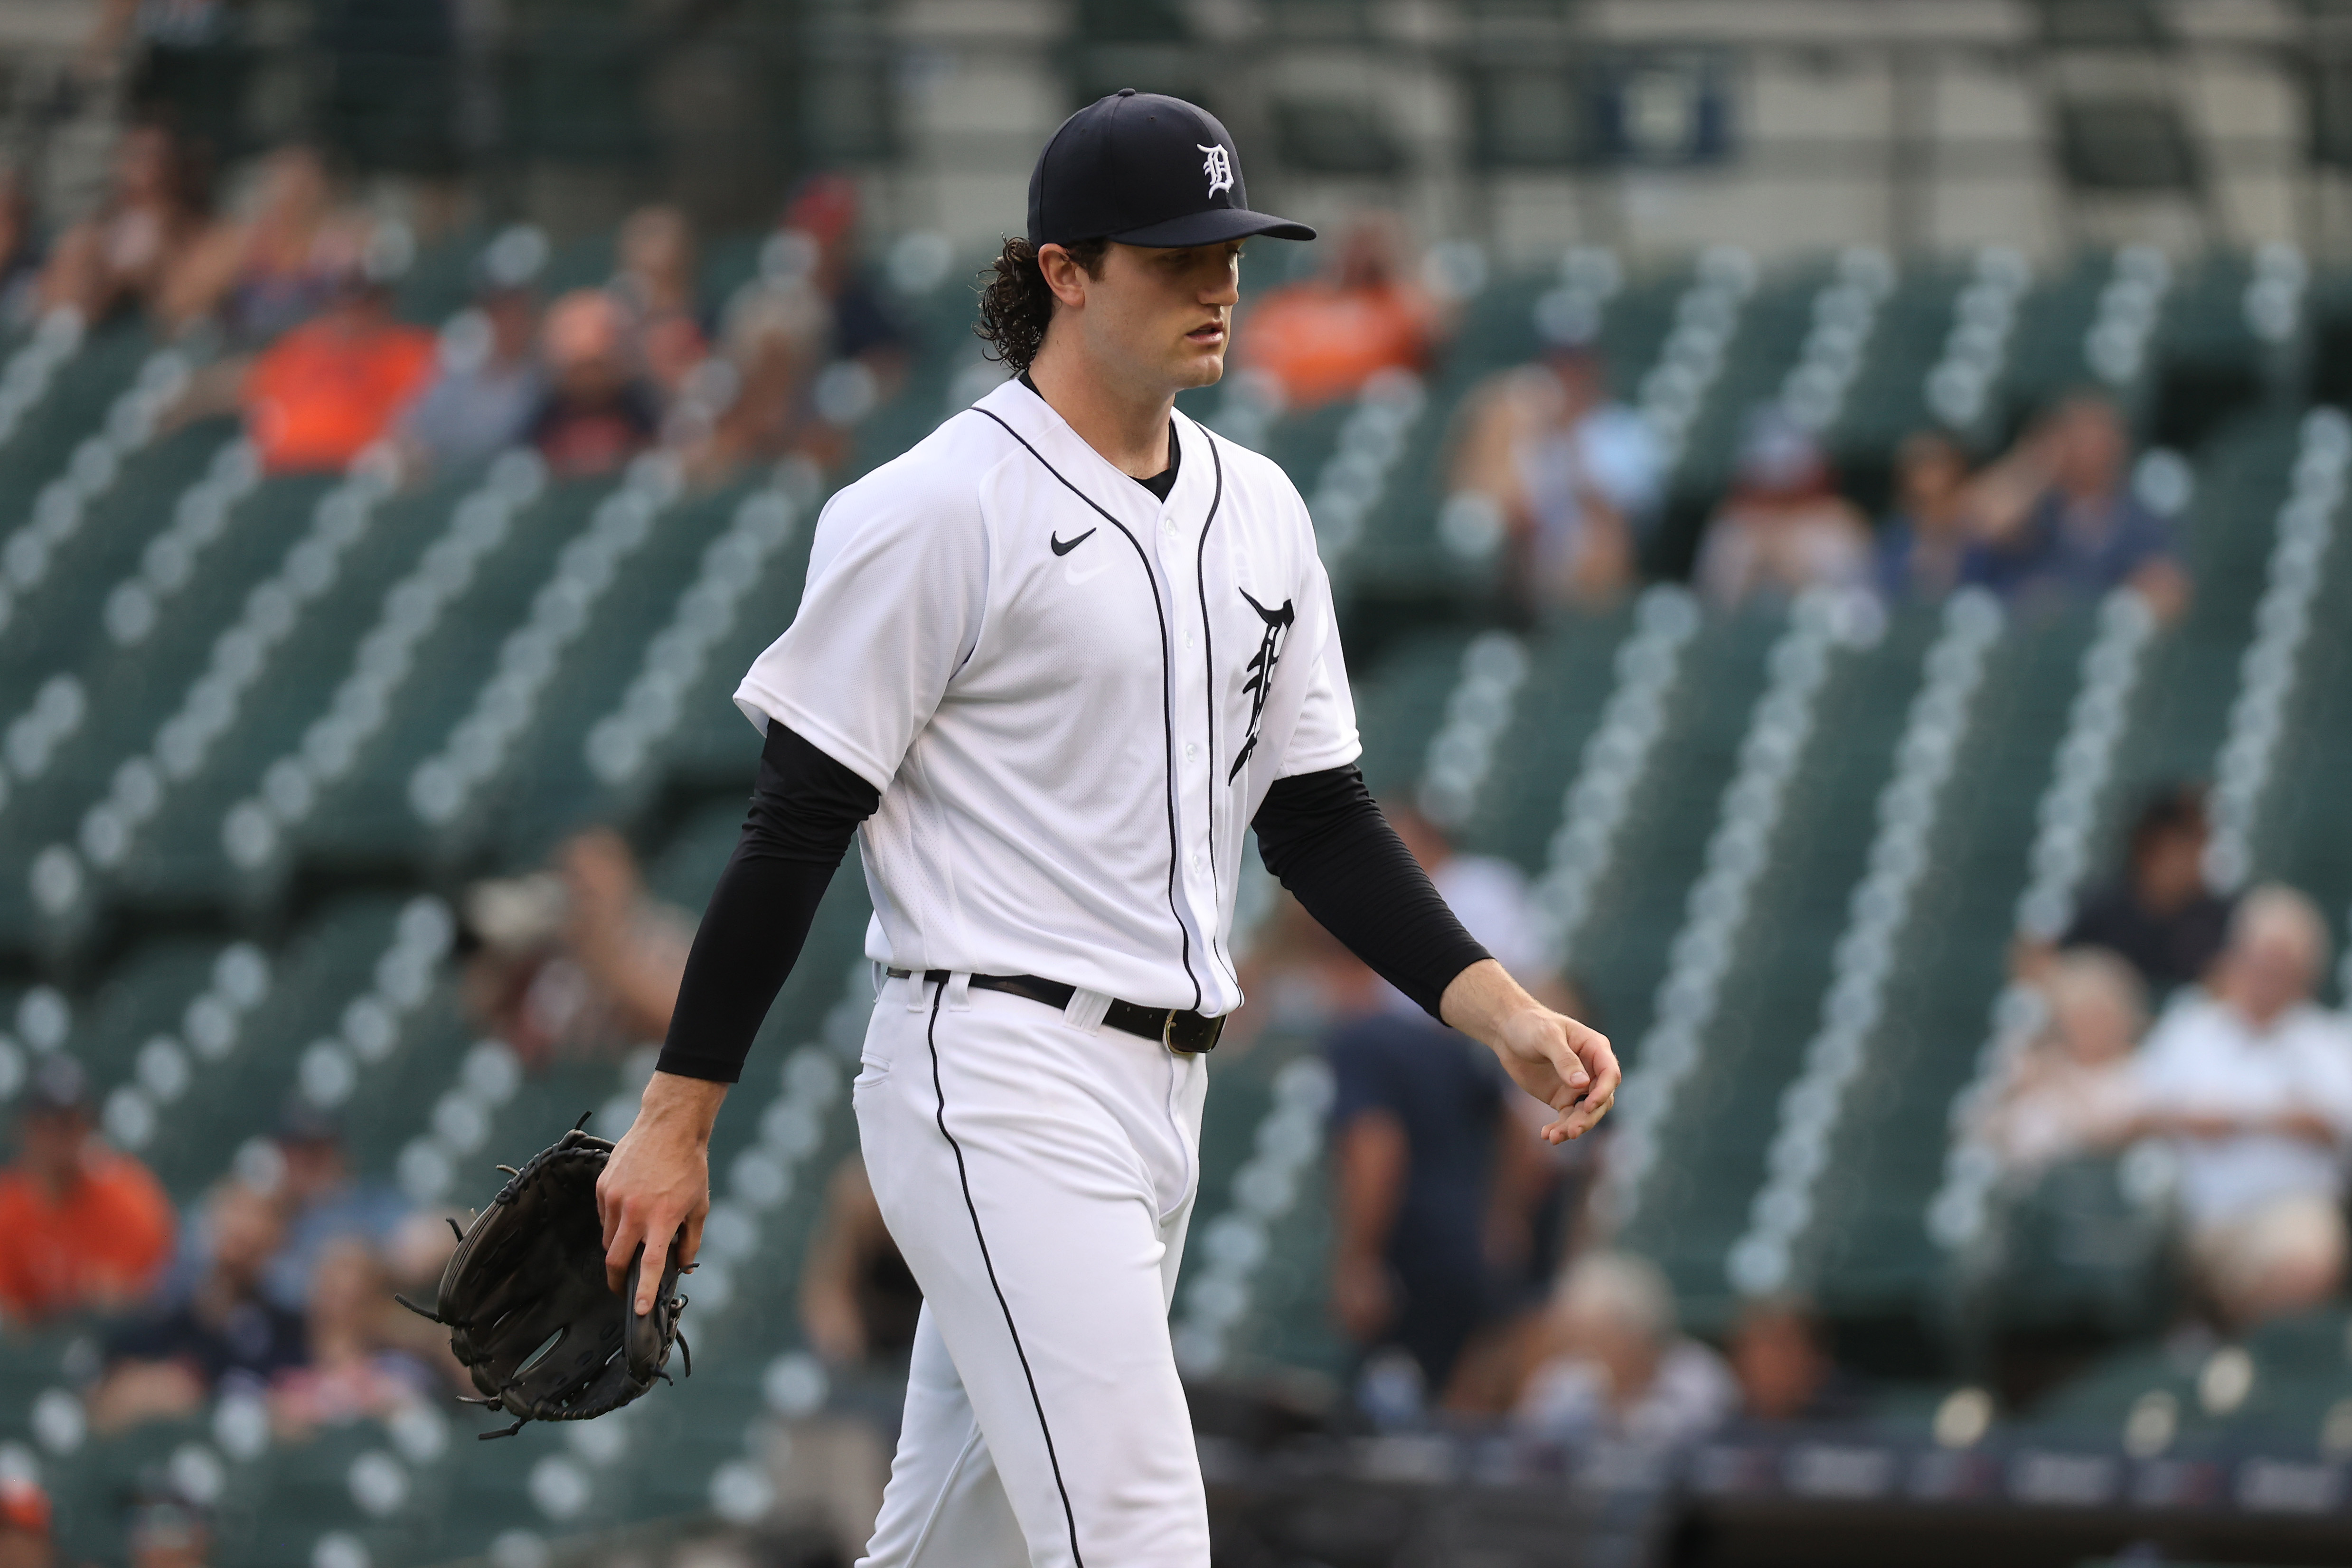 Detroit Tigers open thread: Should Casey Mize pitch in the majors